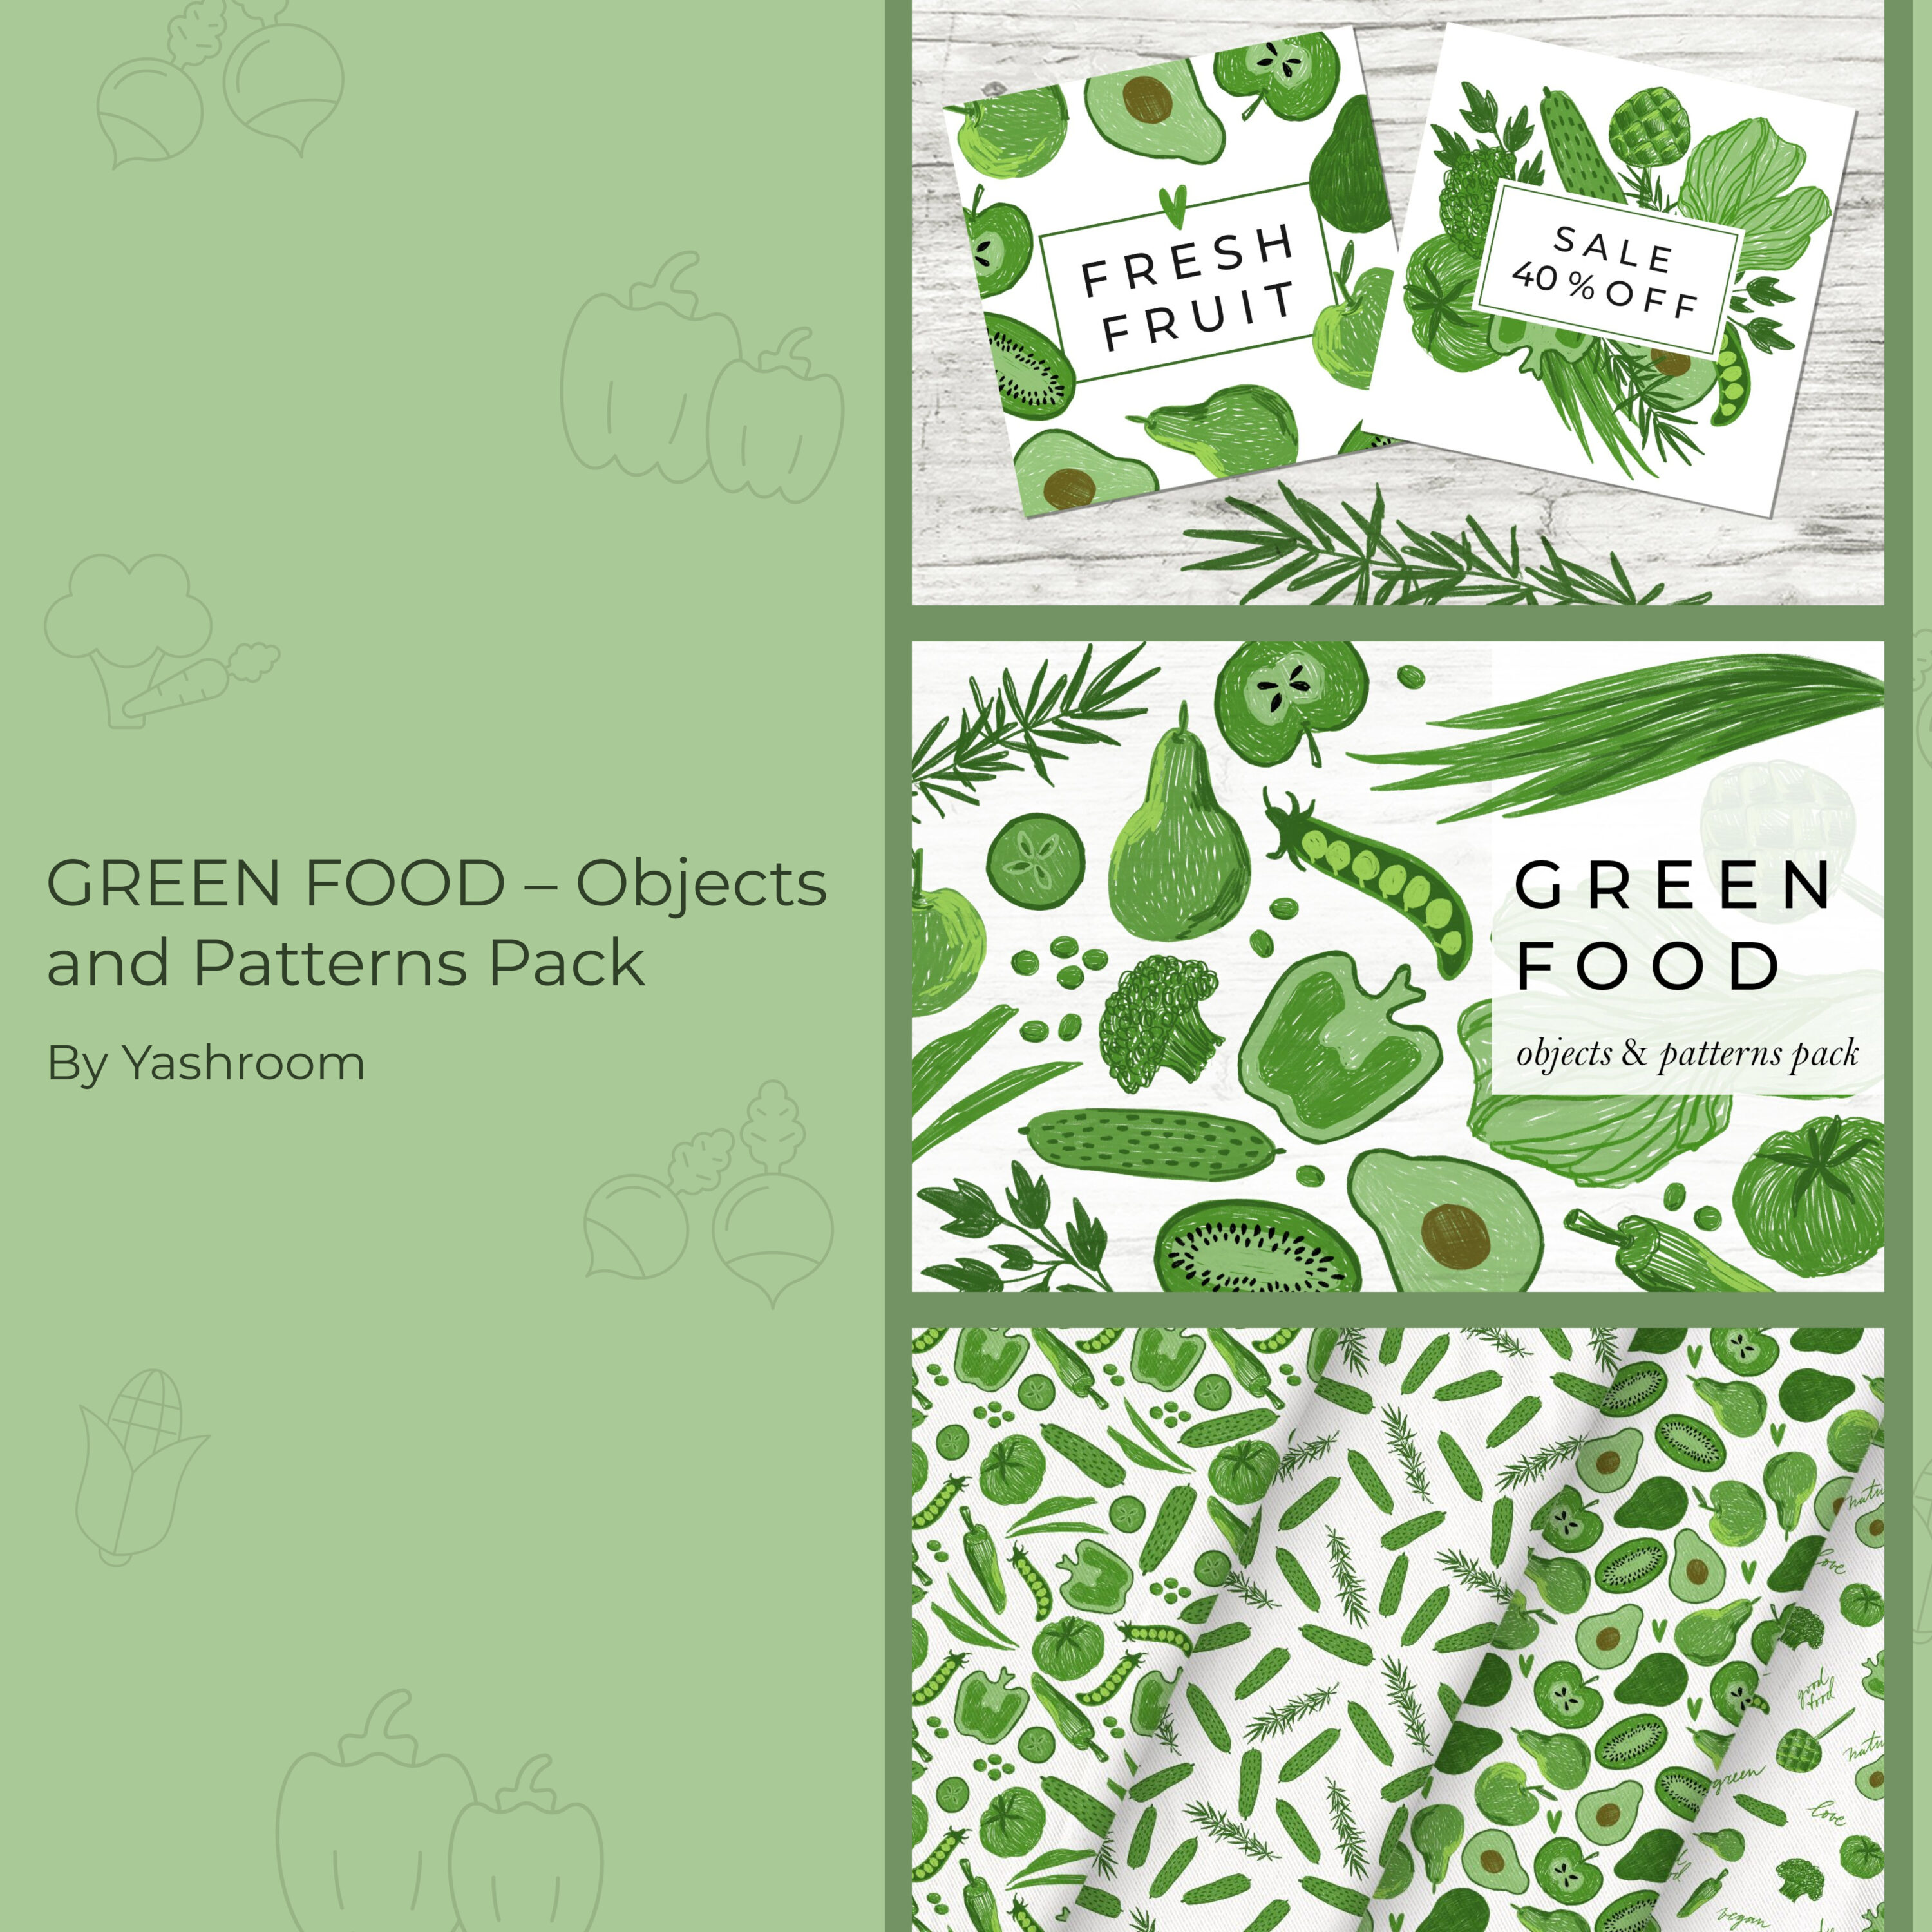 Prints of green food – objects and patterns pack.